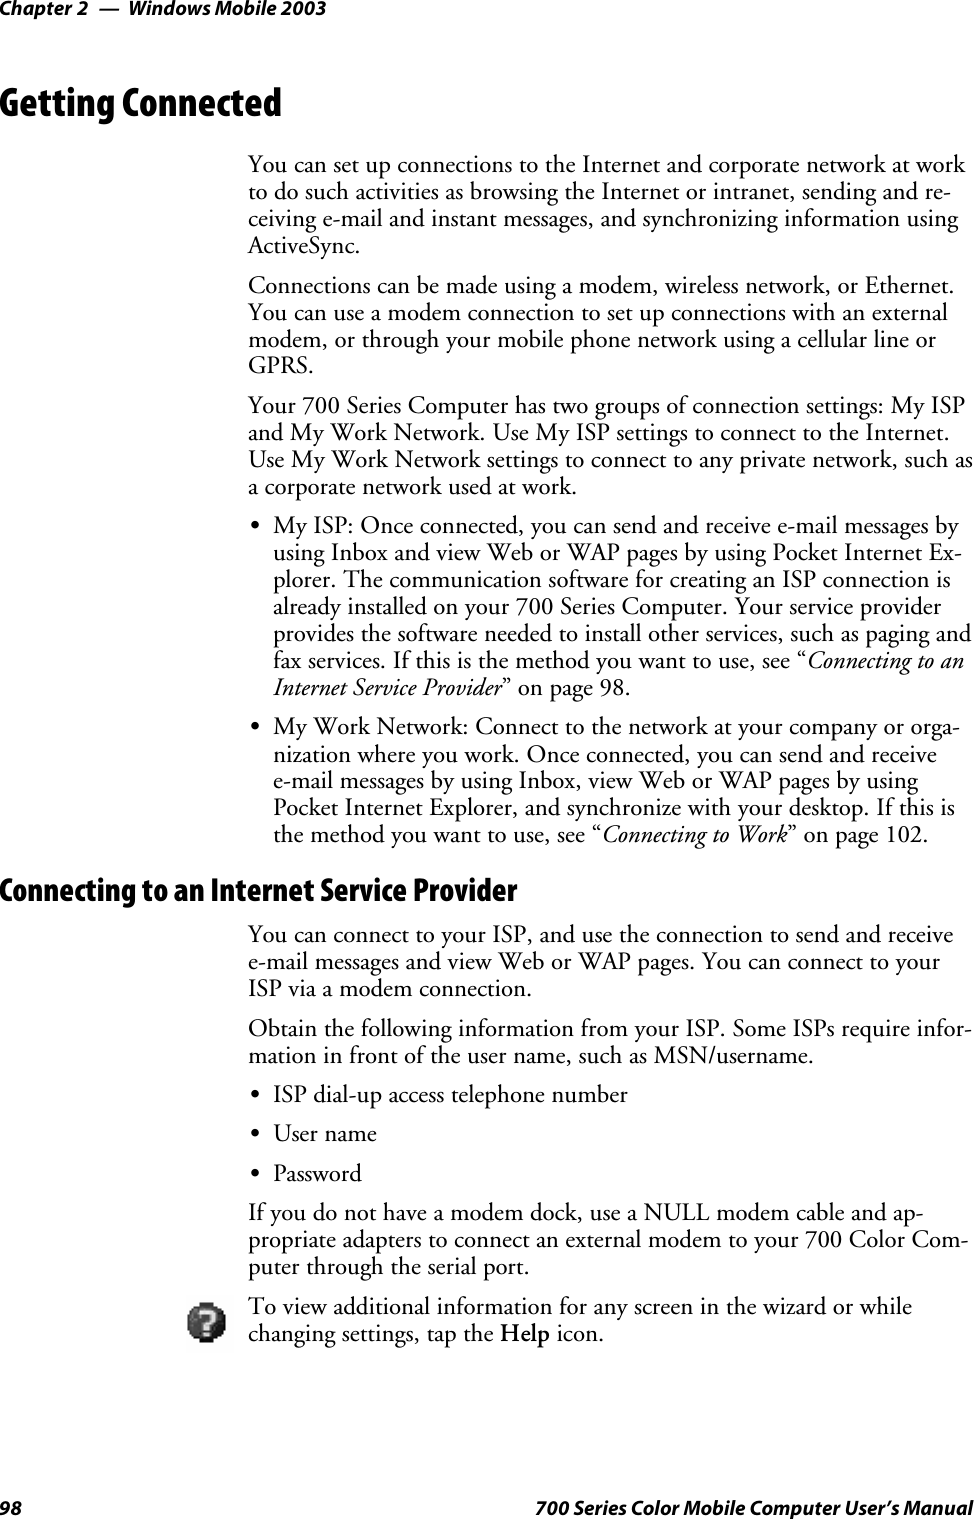 Windows Mobile 2003Chapter —298 700 Series Color Mobile Computer User’s ManualGetting ConnectedYou can set up connections to the Internet and corporate network at workto do such activities as browsing the Internet or intranet, sending and re-ceiving e-mail and instant messages, and synchronizing information usingActiveSync.Connections can be made using a modem, wireless network, or Ethernet.You can use a modem connection to set up connections with an externalmodem, or through your mobile phone network using a cellular line orGPRS.Your 700 Series Computer has two groups of connection settings: My ISPand My Work Network. Use My ISP settings to connect to the Internet.Use My Work Network settings to connect to any private network, such asa corporate network used at work.SMy ISP: Once connected, you can send and receive e-mail messages byusing Inbox and view Web or WAP pages by using Pocket Internet Ex-plorer. The communication software for creating an ISP connection isalready installed on your 700 Series Computer. Your service providerprovides the software needed to install other services, such as paging andfax services. If this is the method you want to use, see “Connecting to anInternet Service Provider”onpage98.SMy Work Network: Connect to the network at your company or orga-nization where you work. Once connected, you can send and receivee-mail messages by using Inbox, view Web or WAP pages by usingPocket Internet Explorer, and synchronize with your desktop. If this isthe method you want to use, see “Connecting to Work” on page 102.Connecting to an Internet Service ProviderYou can connect to your ISP, and use the connection to send and receivee-mail messages and view Web or WAP pages. You can connect to yourISP via a modem connection.Obtain the following information from your ISP. Some ISPs require infor-mation in front of the user name, such as MSN/username.SISP dial-up access telephone numberSUser nameSPasswordIf you do not have a modem dock, use a NULL modem cable and ap-propriate adapters to connect an external modem to your 700 Color Com-puter through the serial port.To view additional information for any screen in the wizard or whilechanging settings, tap the Help icon.